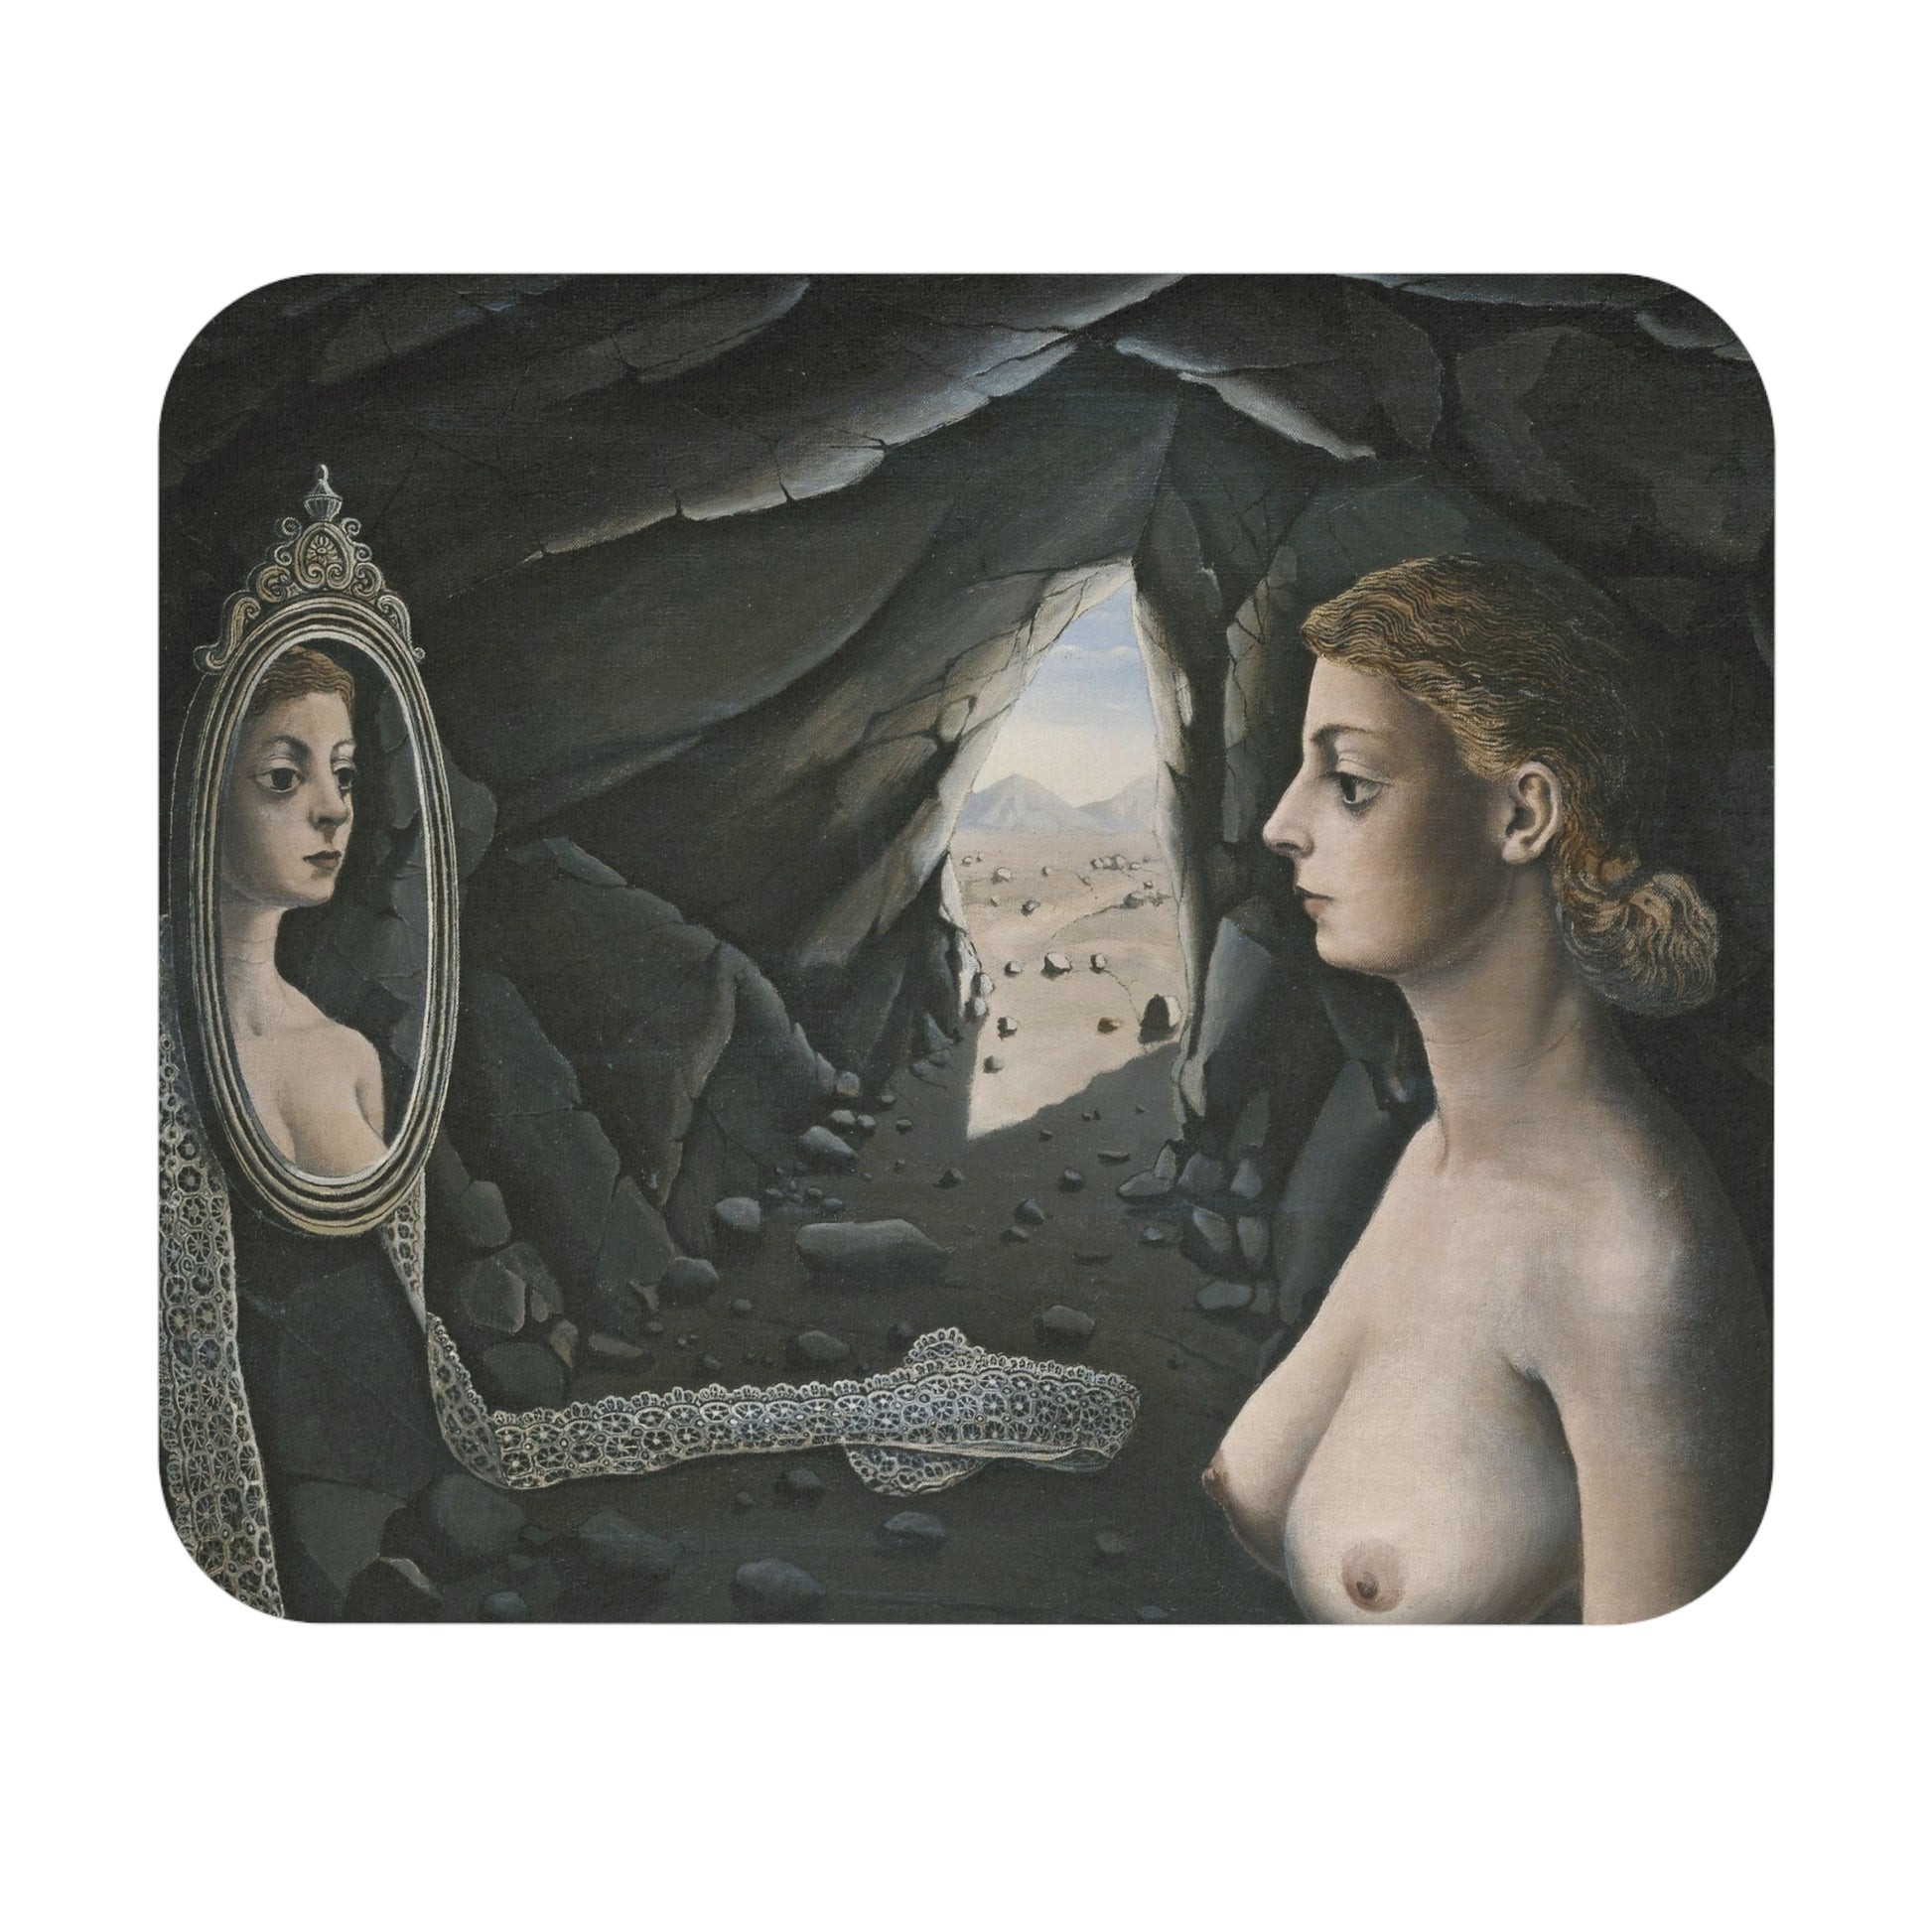 PAUL DELVAUX - WOMAN IN THE MIRROR - ART MOUSE PAD